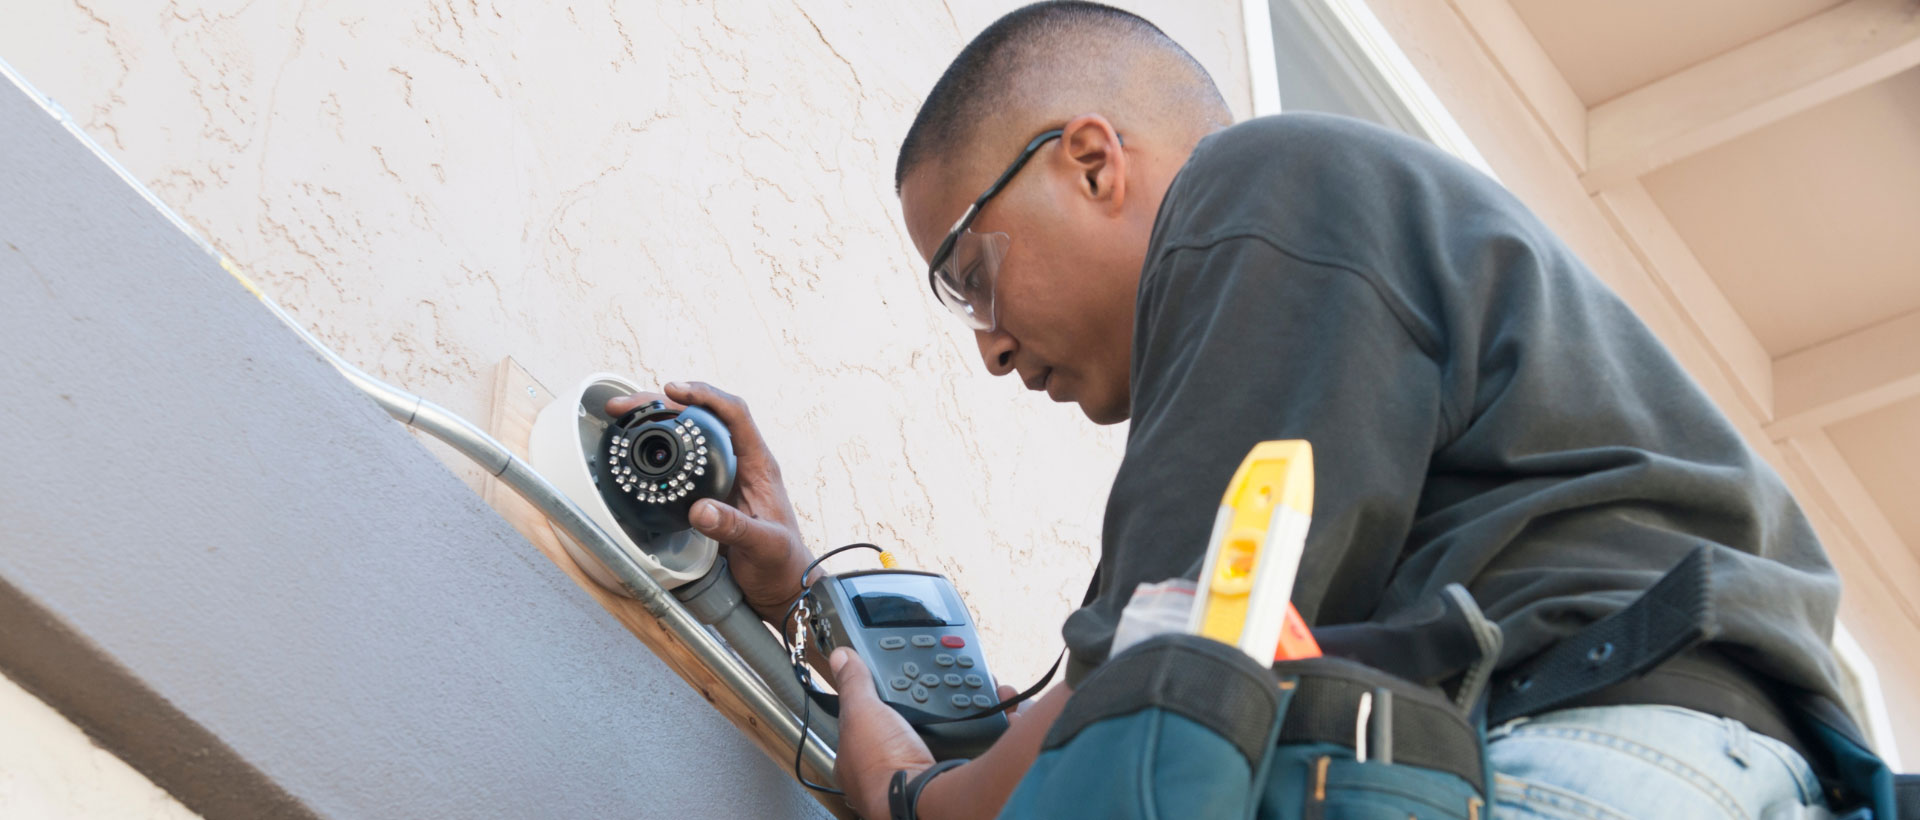 Young man installing Security Camera Systems